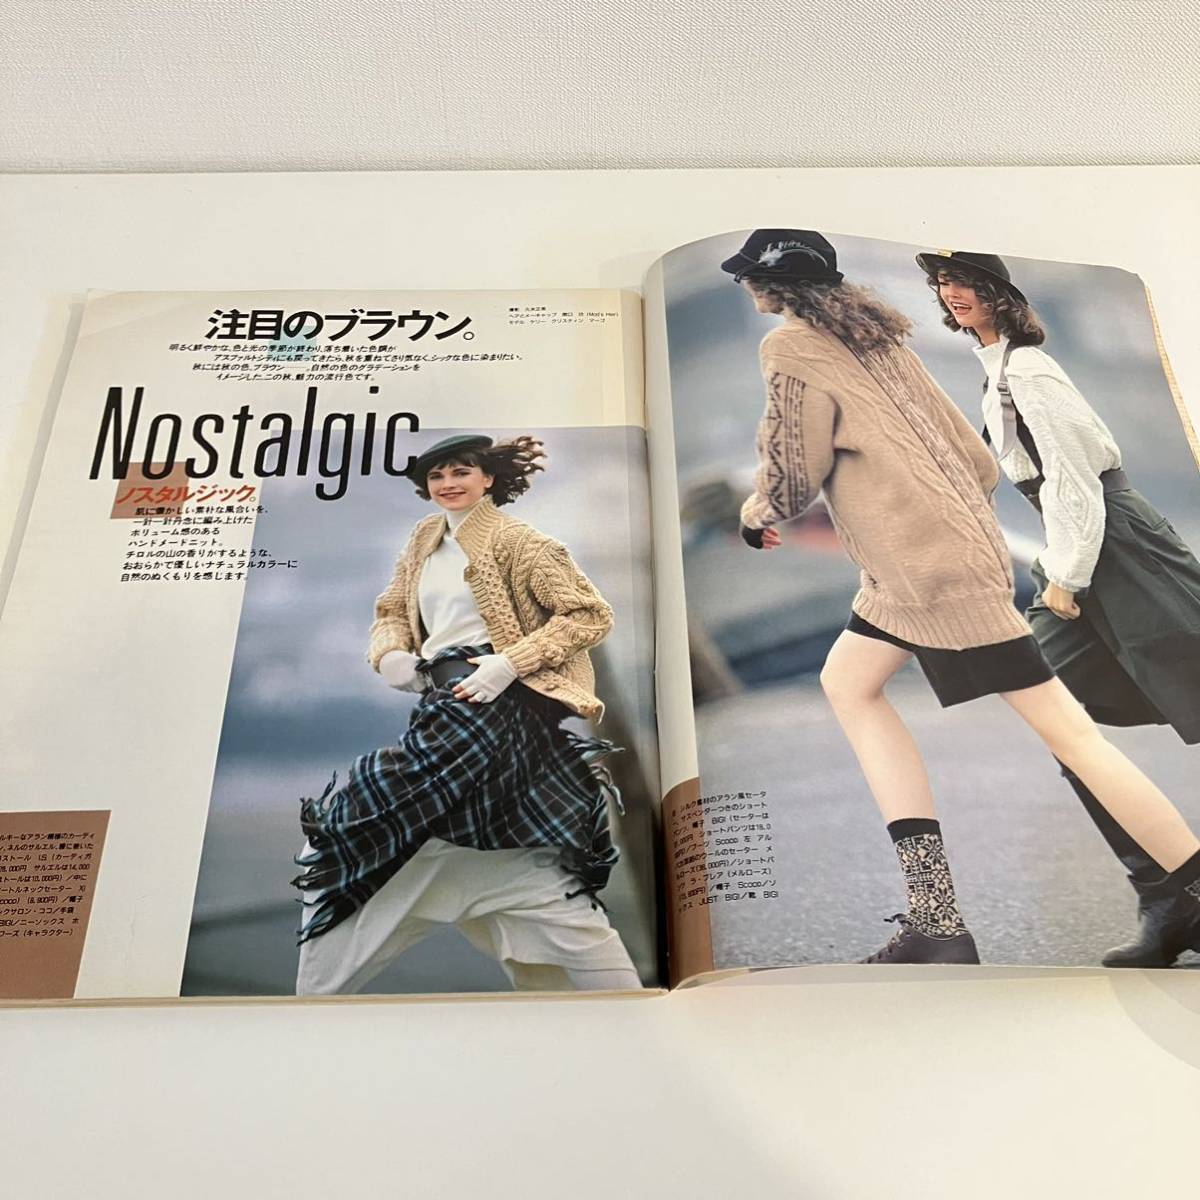 [ price cut ]230121 equipment .1986 year 10 month number * Showa Retro that time thing fashion rare magazine SOEN culture publish department * dressmaking drafting attaching * mode suit 